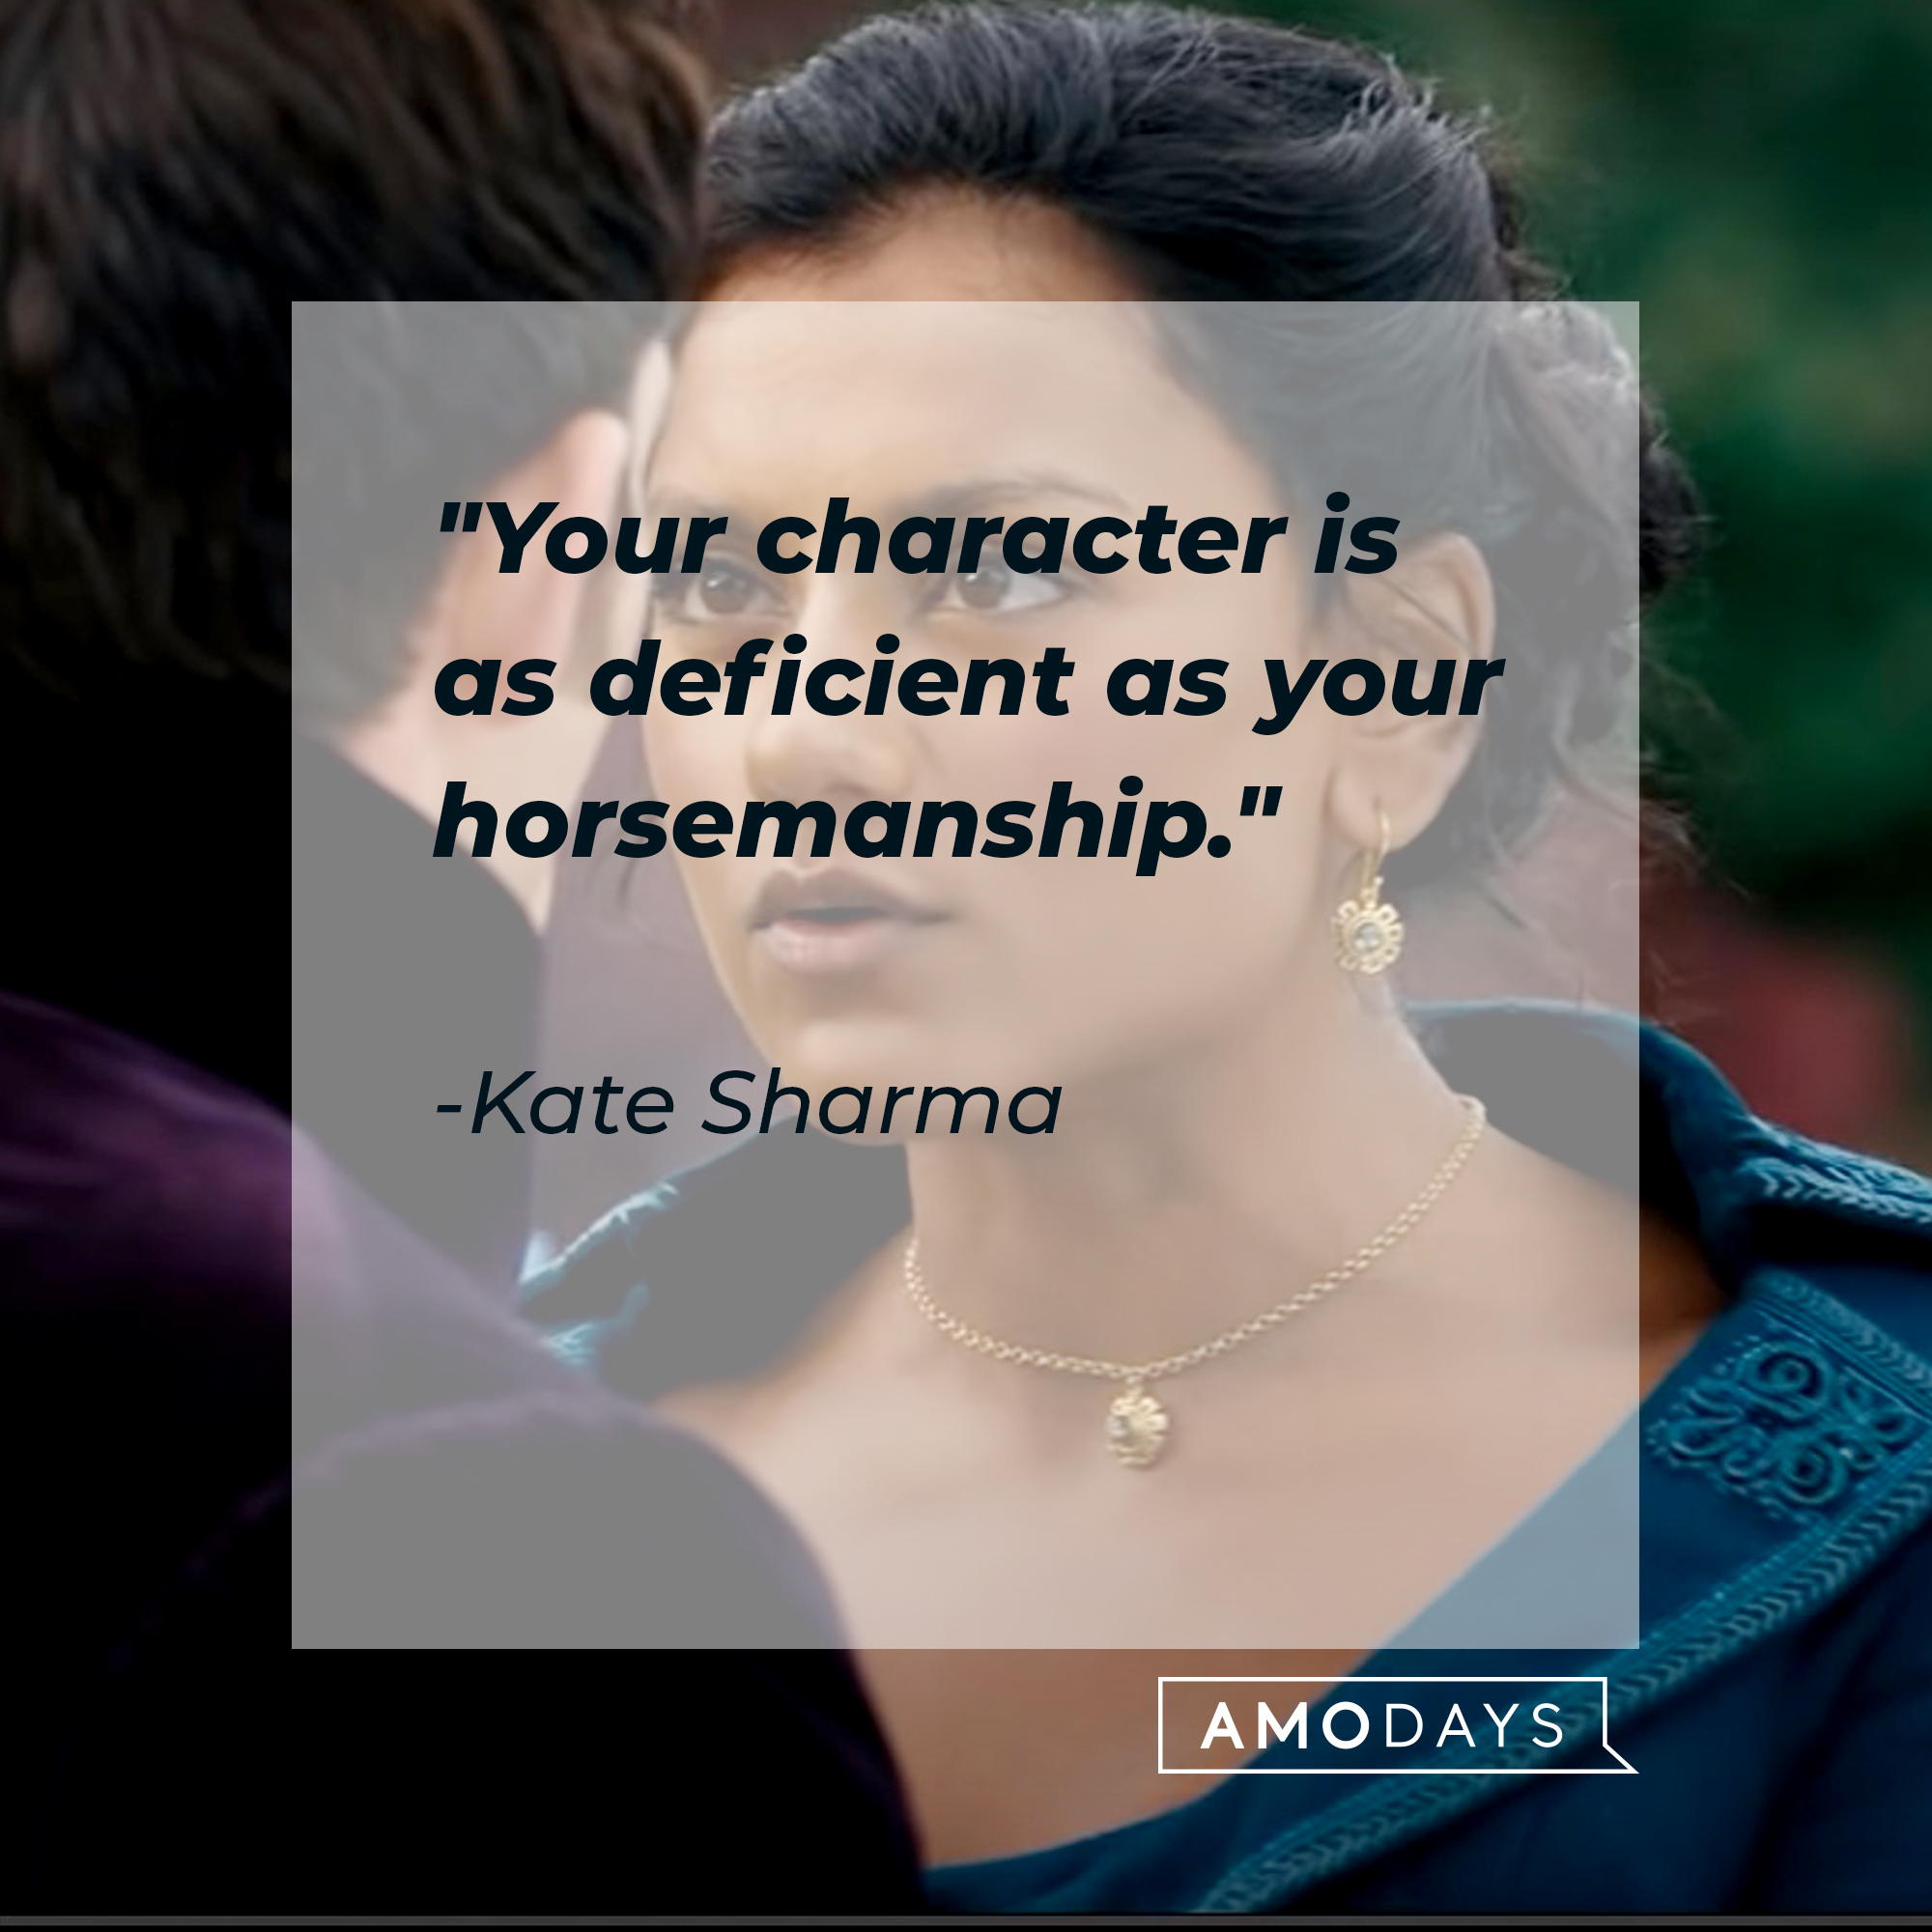 An image of Kate Sharma with her  quote: "Your character is as deficient as your horsemanship." │ youtube.com/Netflix